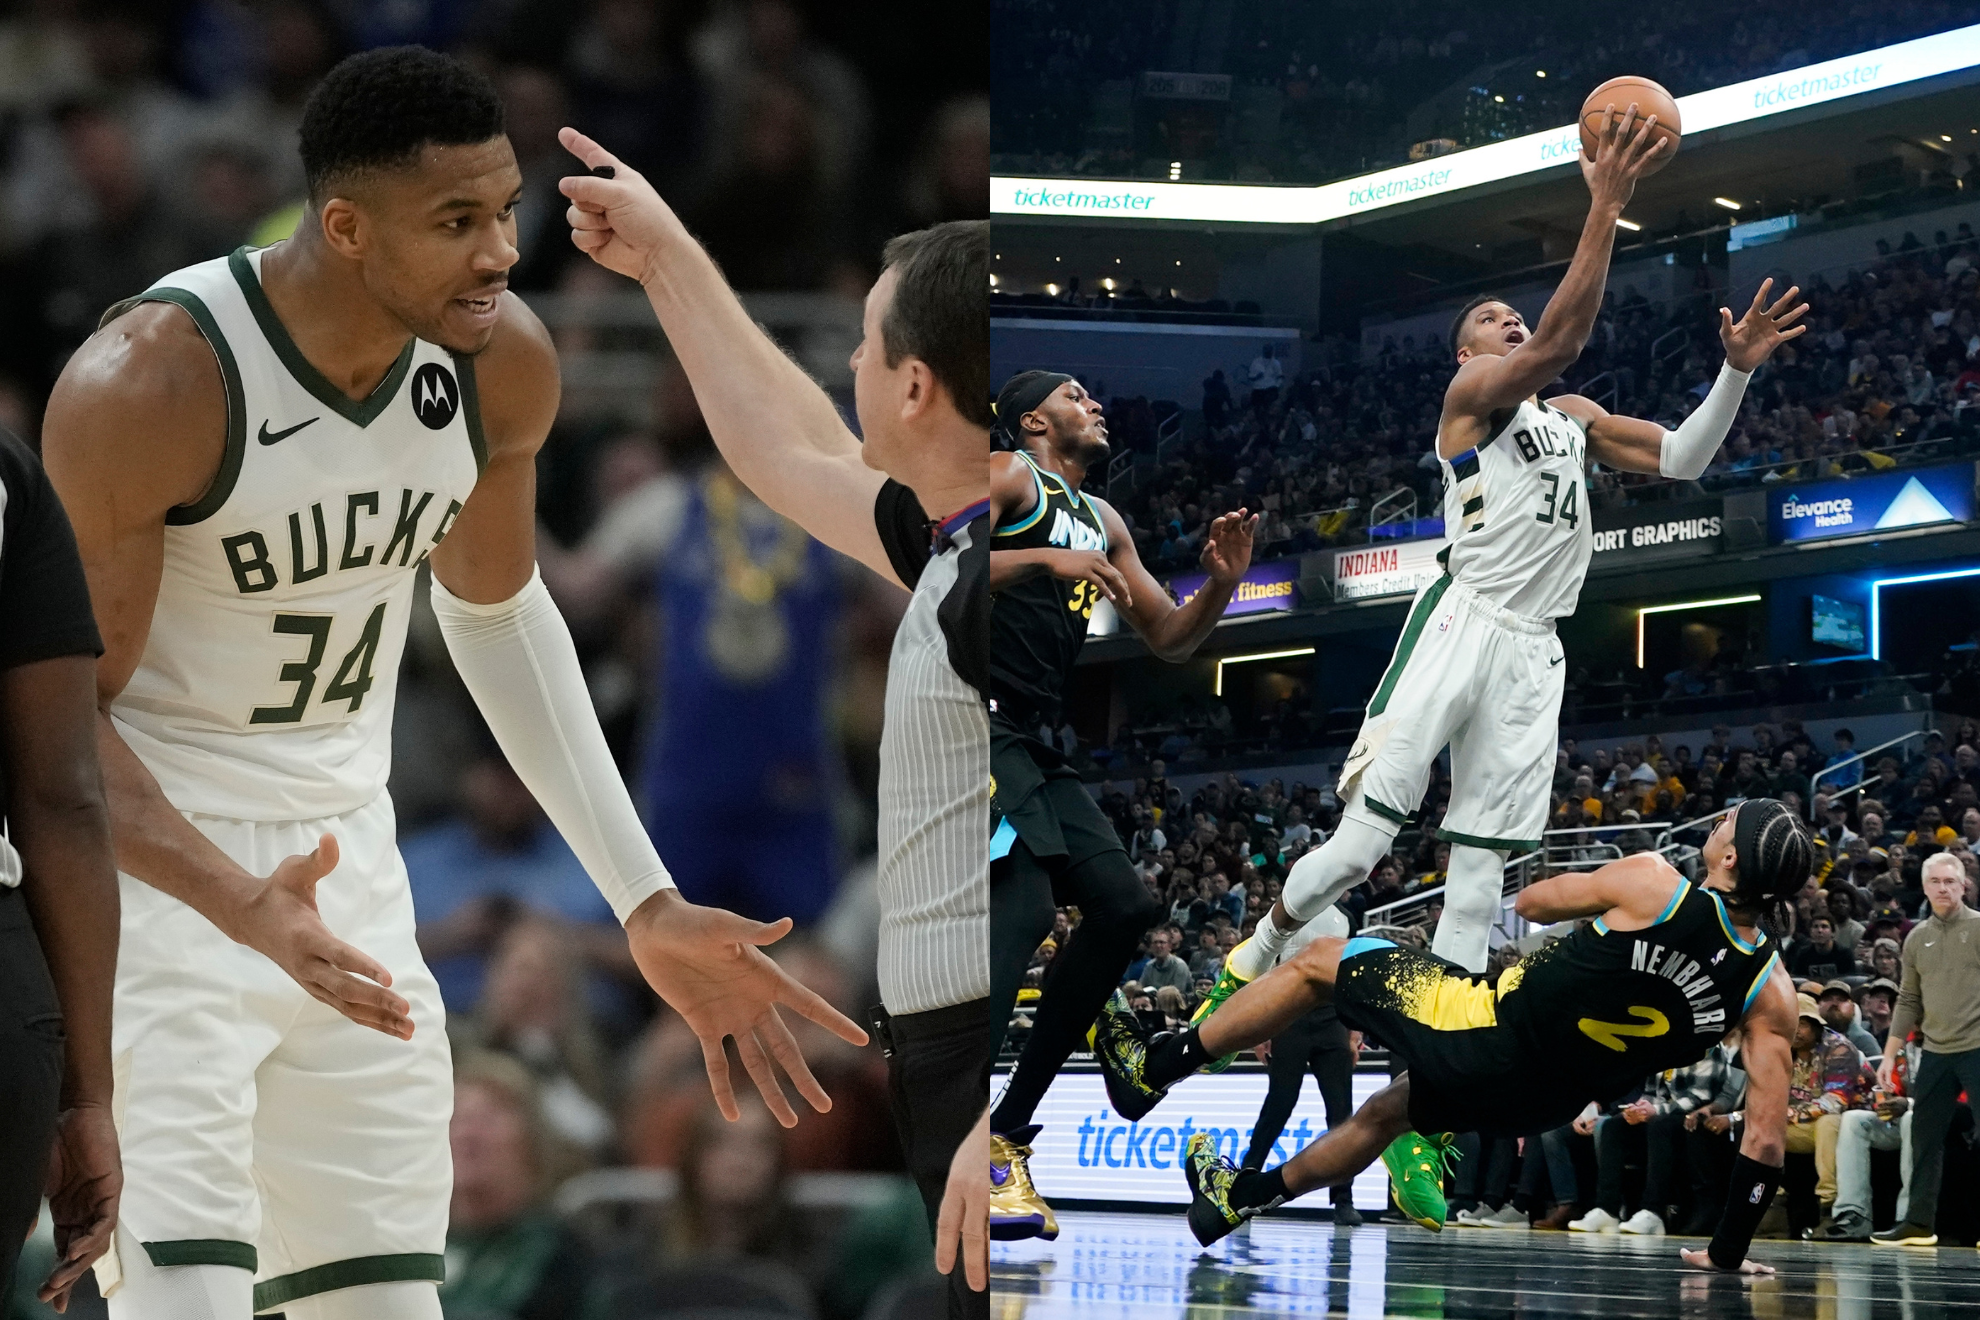 Giannis Antetokounmpo goes from getting ejected to scoring 54 points.